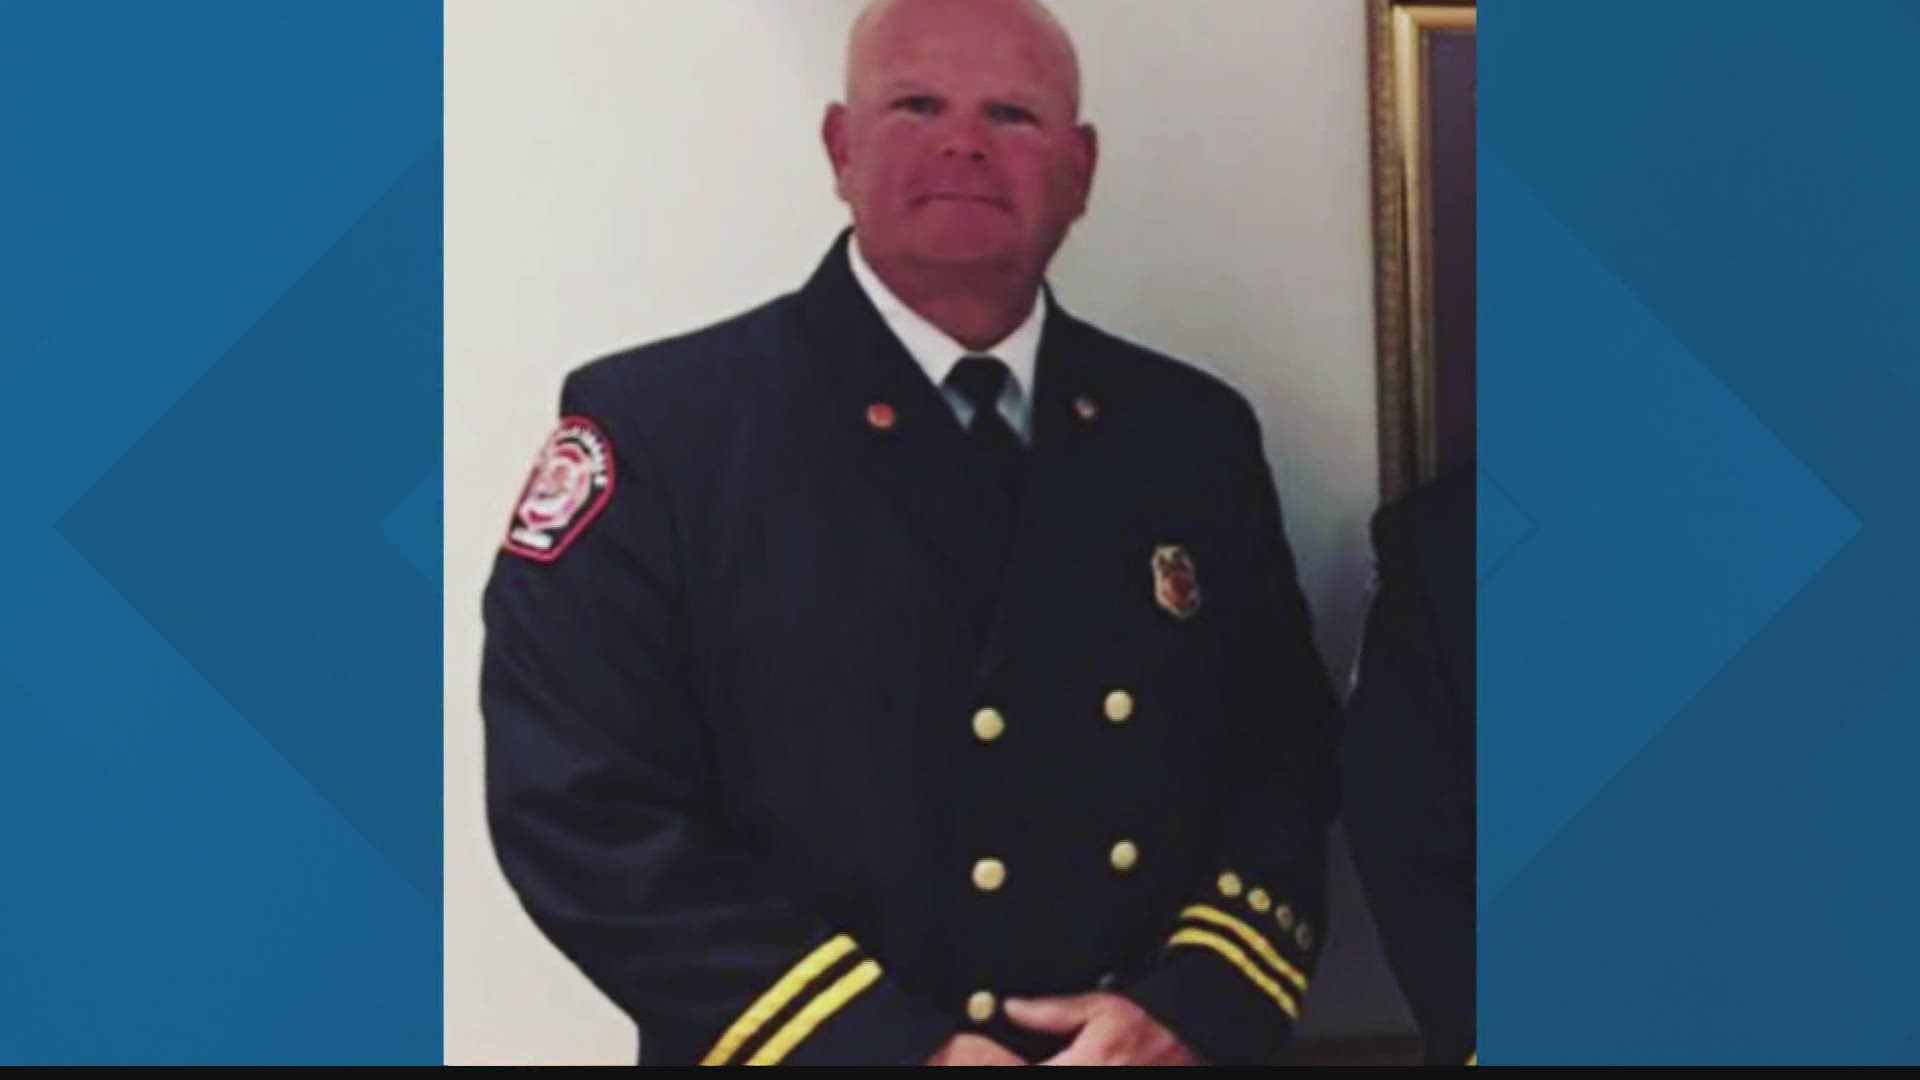 Shane Puckett has been a firefighter for more than 20 years, currently working with the Muscle Shoals and Tuscumbia fire departments.